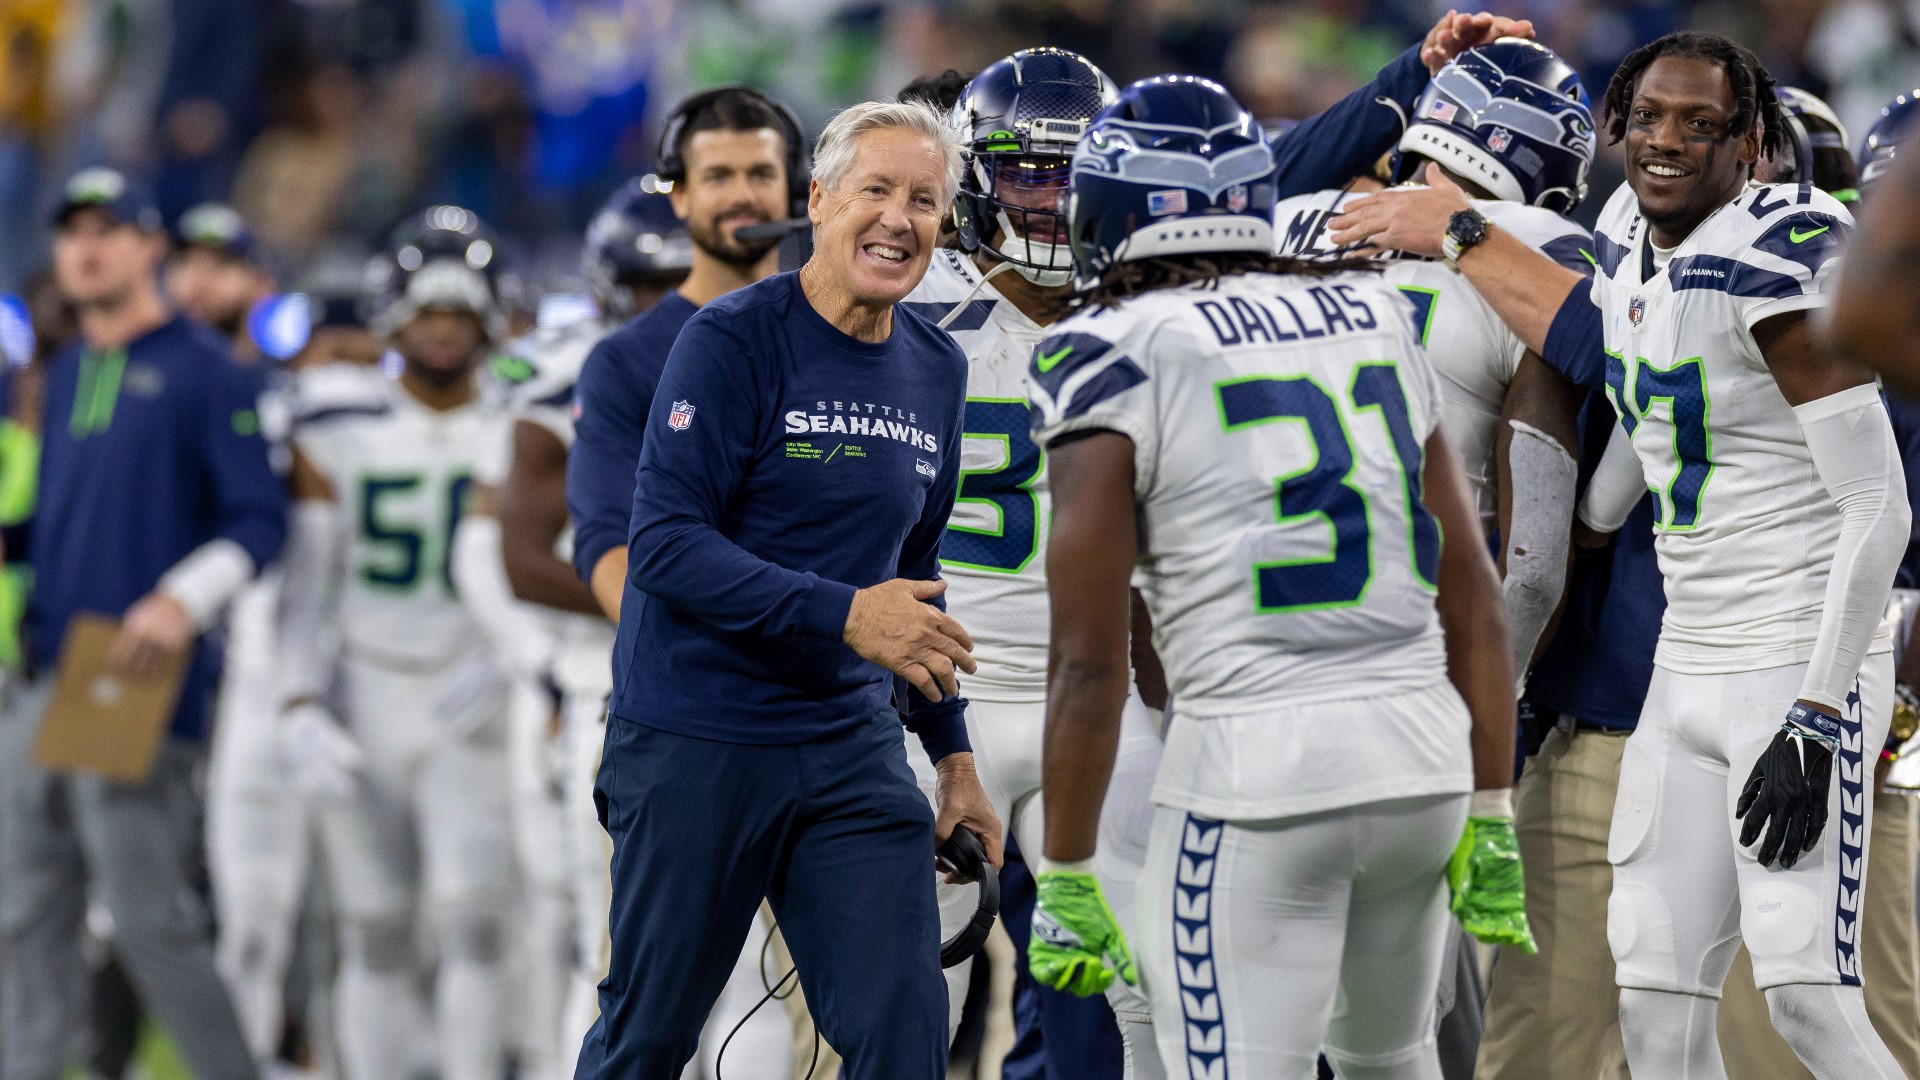 The Seahawks are hoping to put together another exceptional draft class in 2023, but just as in Hollywood, sequels are hit-and-miss.